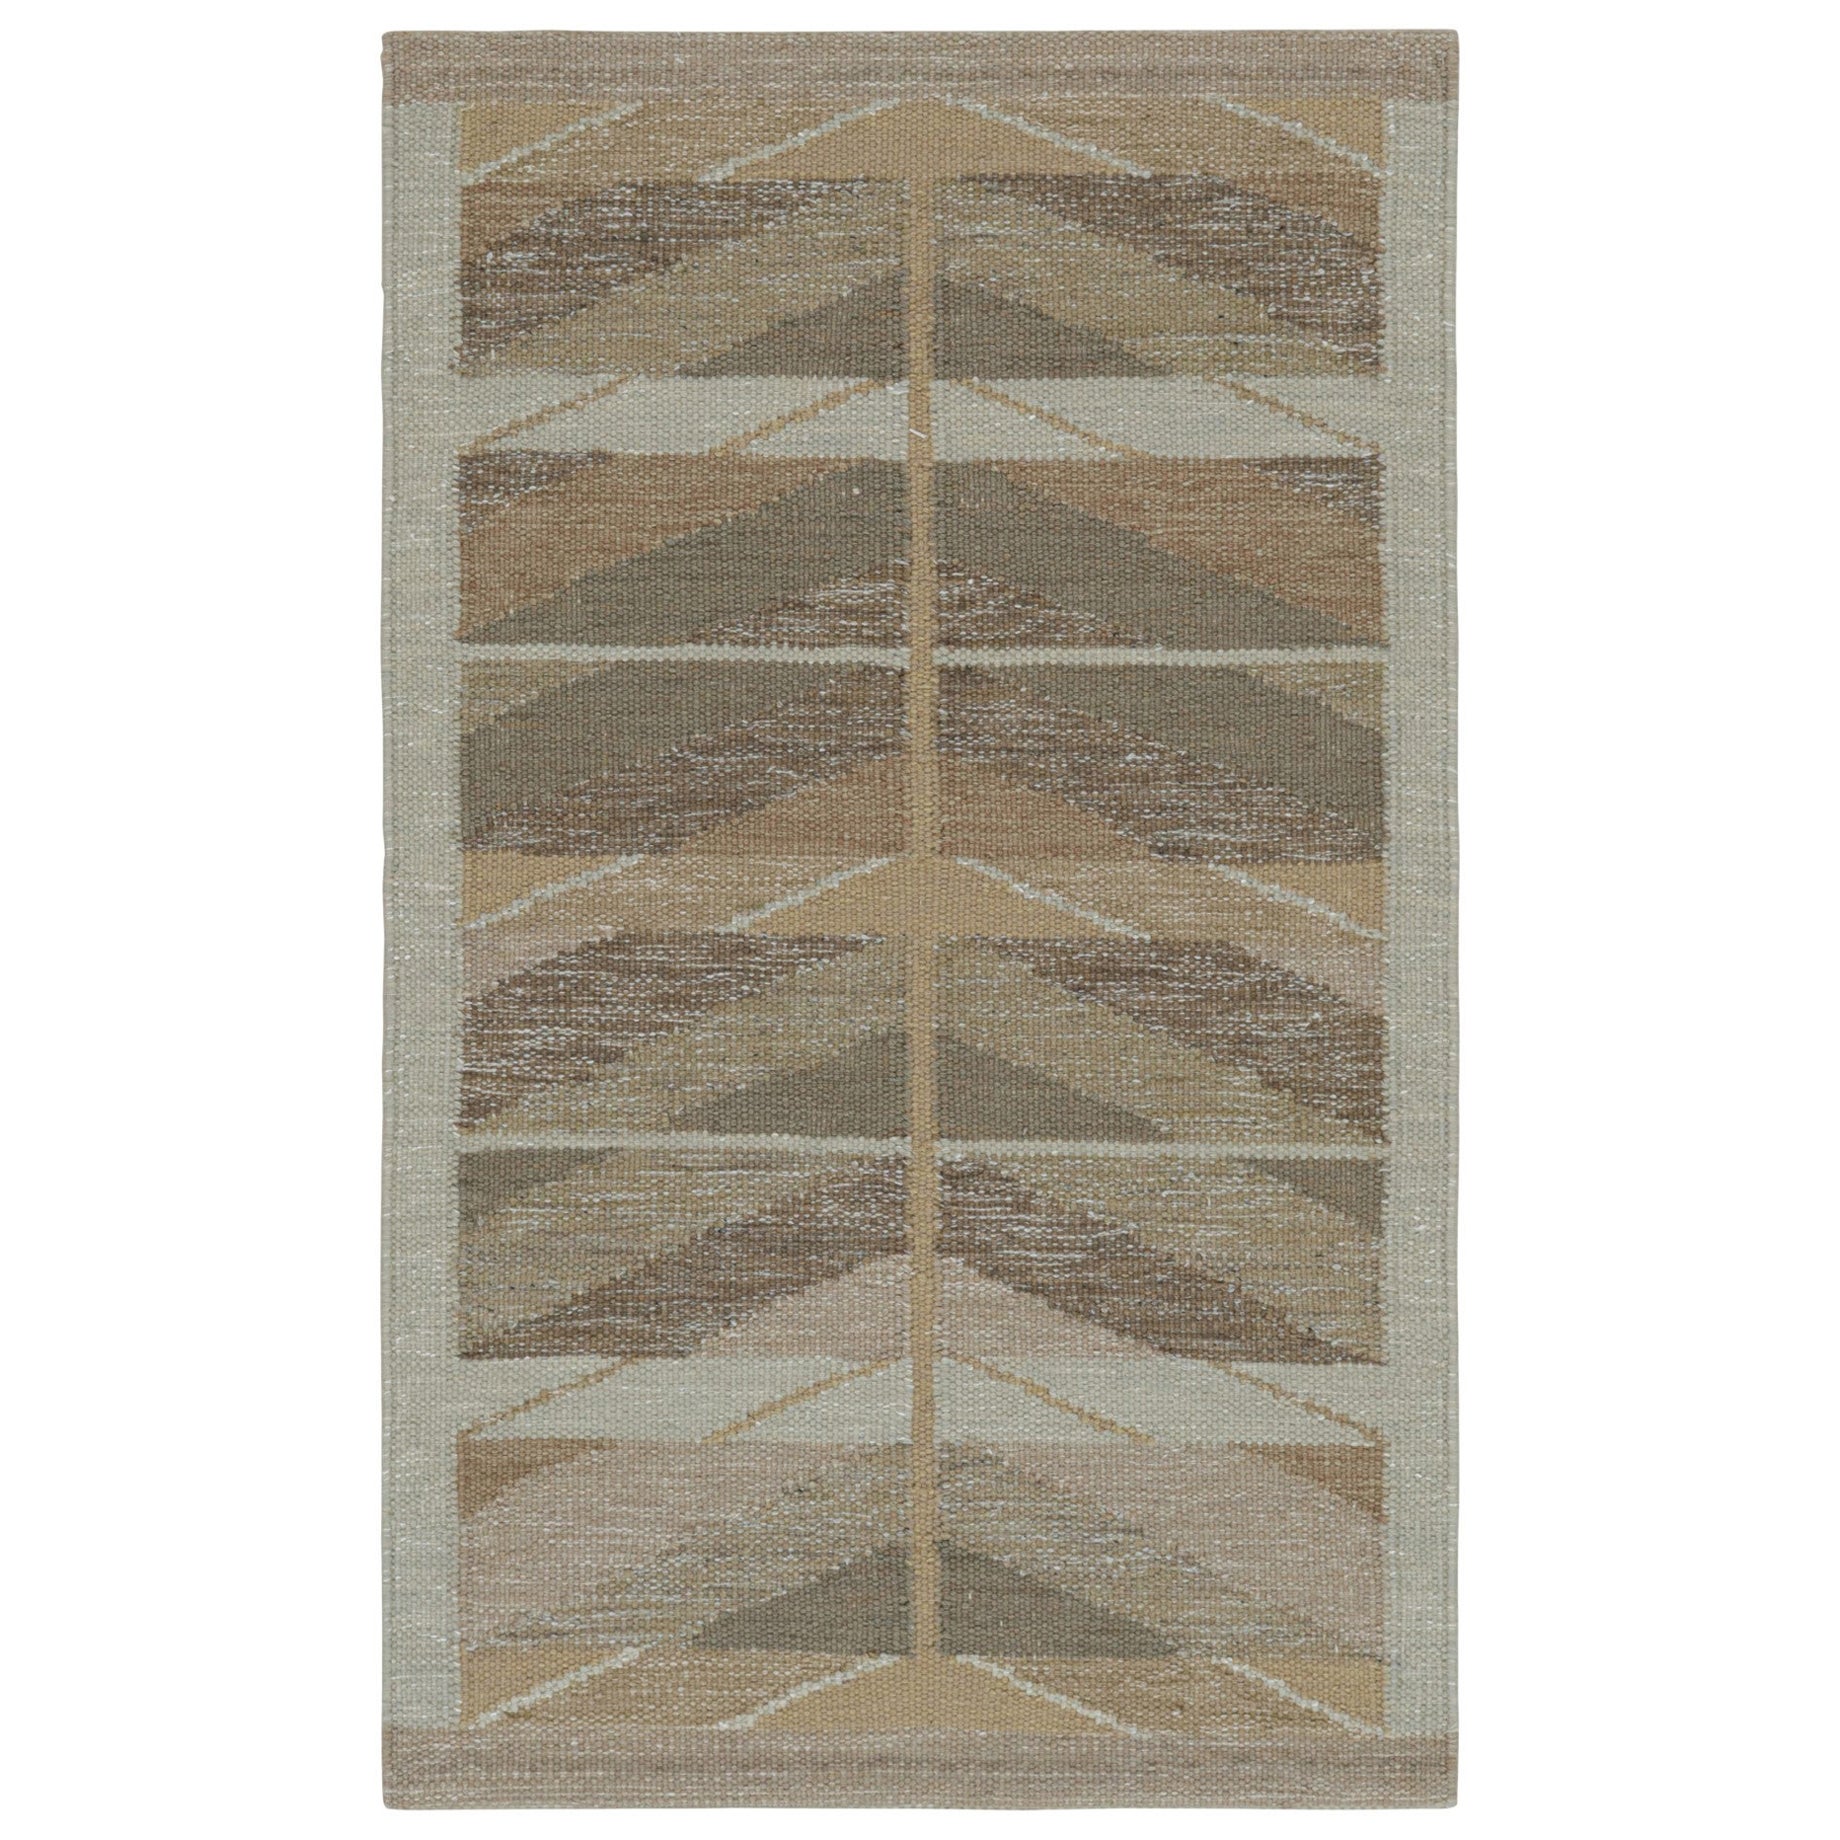 Rug & Kilim’s Scandinavian Kilim and Scatter Rug with Geometric Patterns For Sale